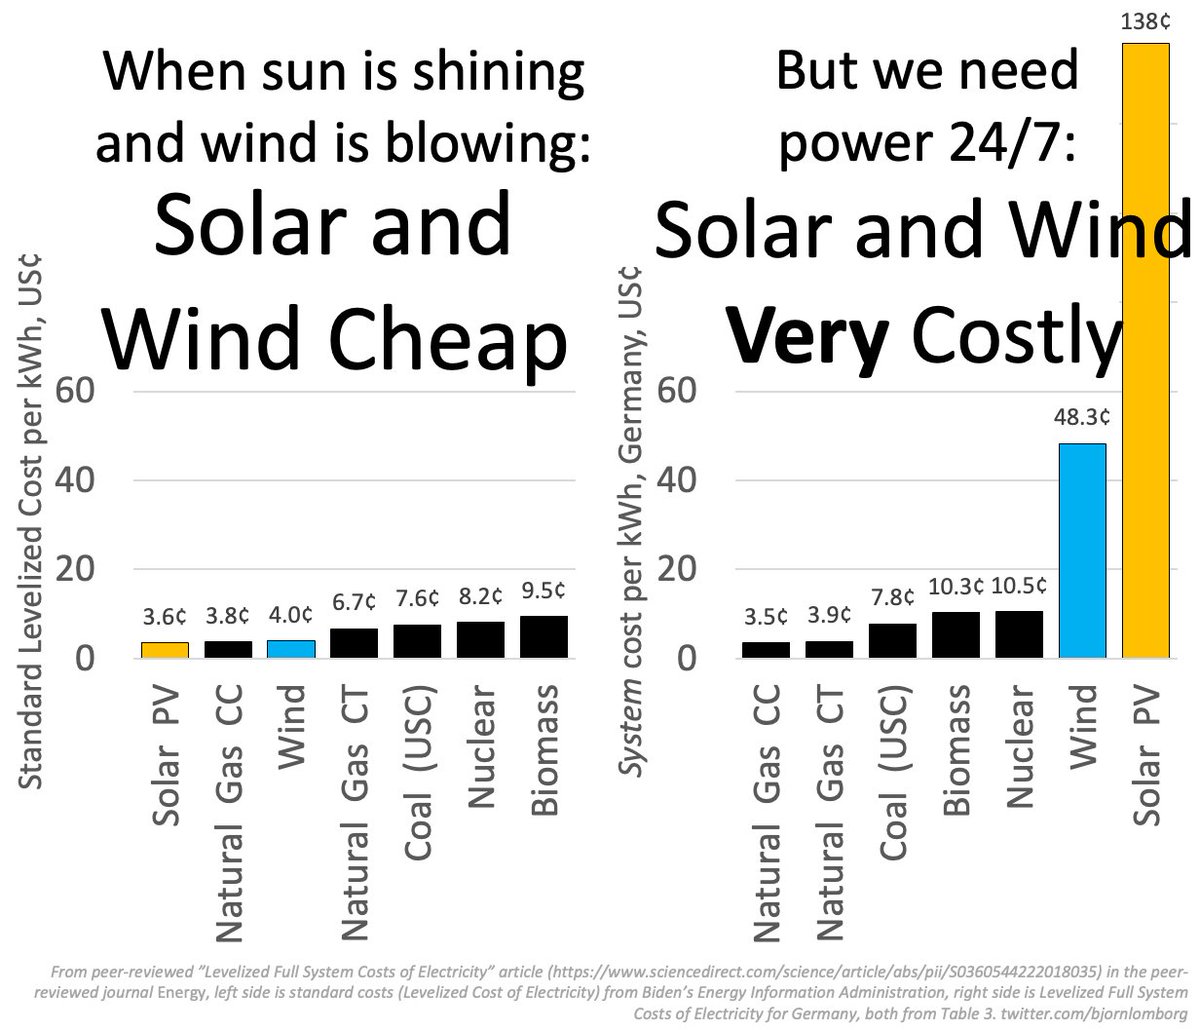 Duped: We're constantly told wind and solar cheapest But only true when windy and sunny They don't secure the electricity system 24/7 Include their full system costs (supply & balance): New research shows they're the most expensive, here Germany sciencedirect.com/science/articl…